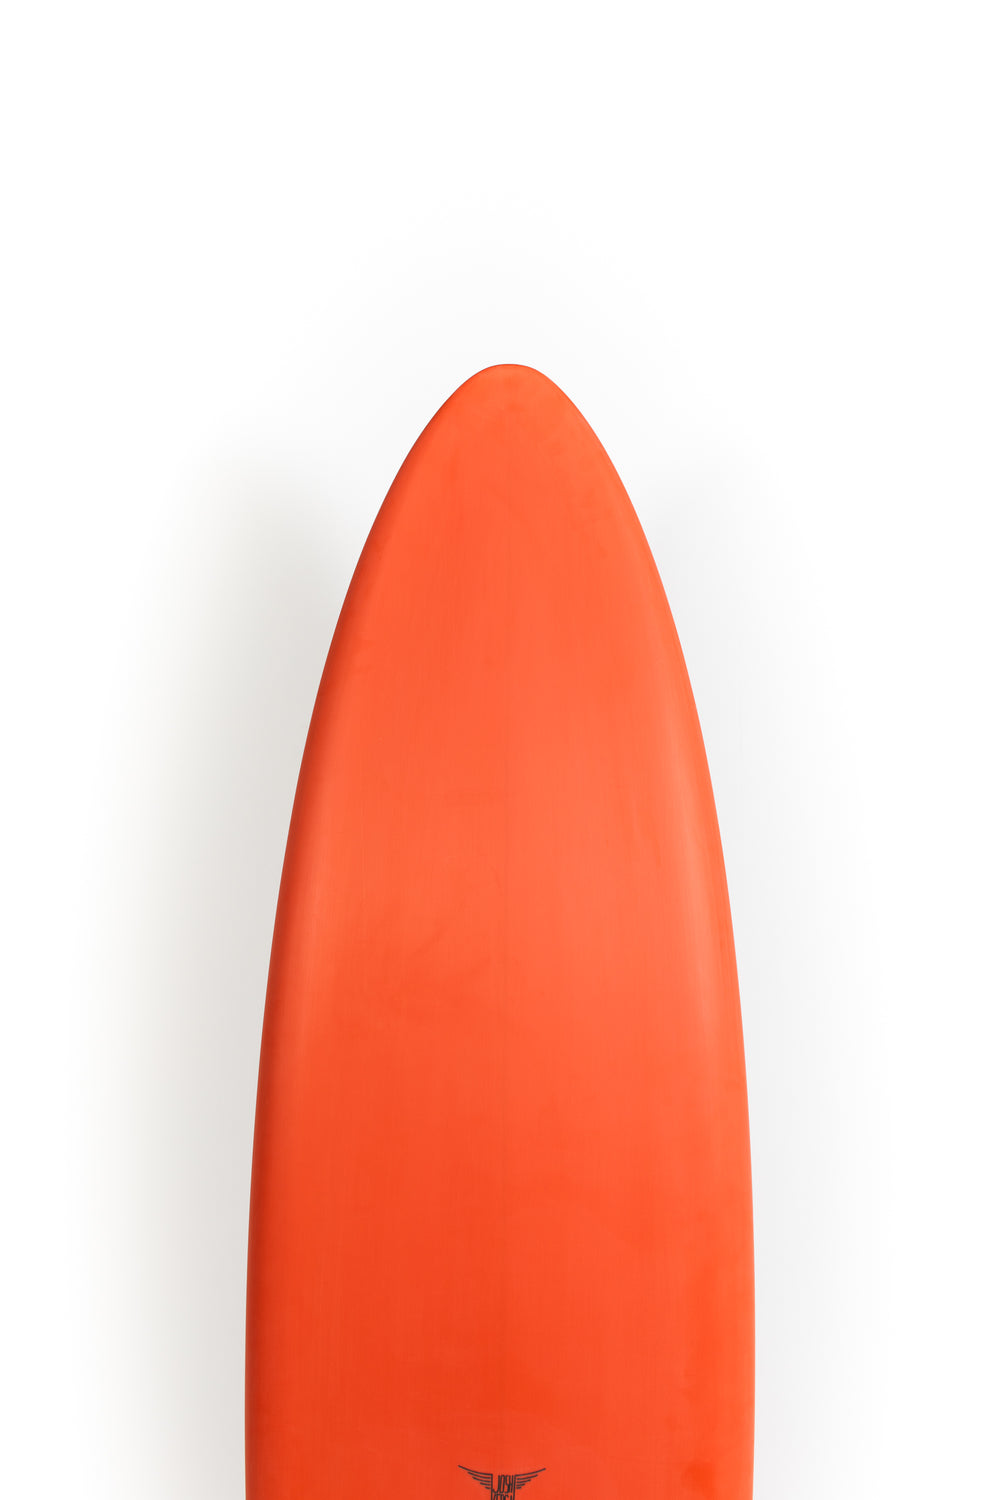 Dr Ding surfboards company